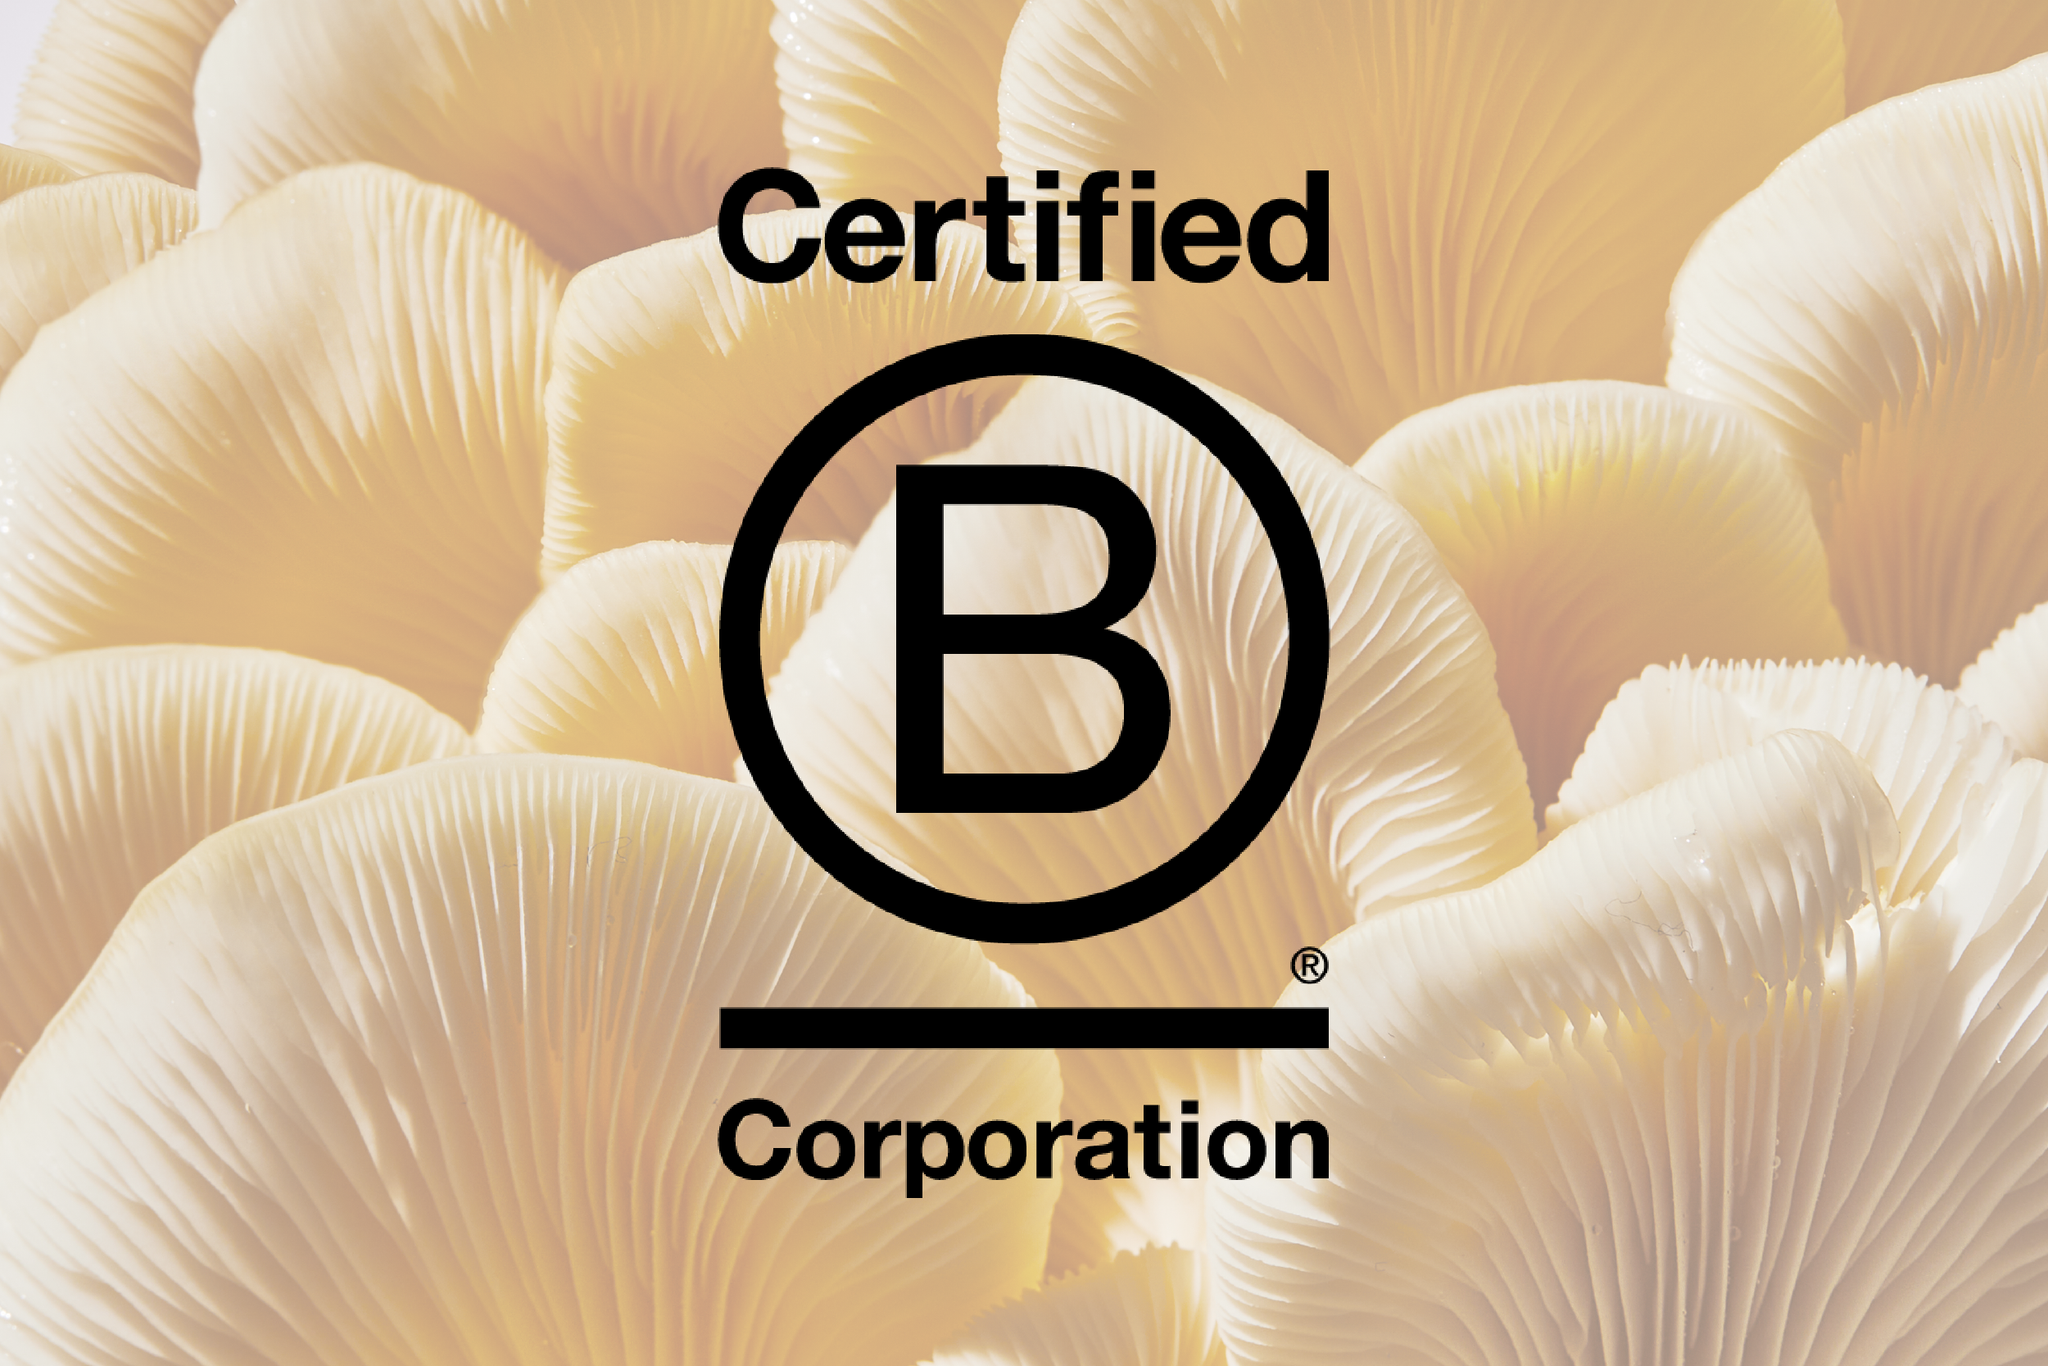 certified b corp text against a background of yellow oyster mushrooms